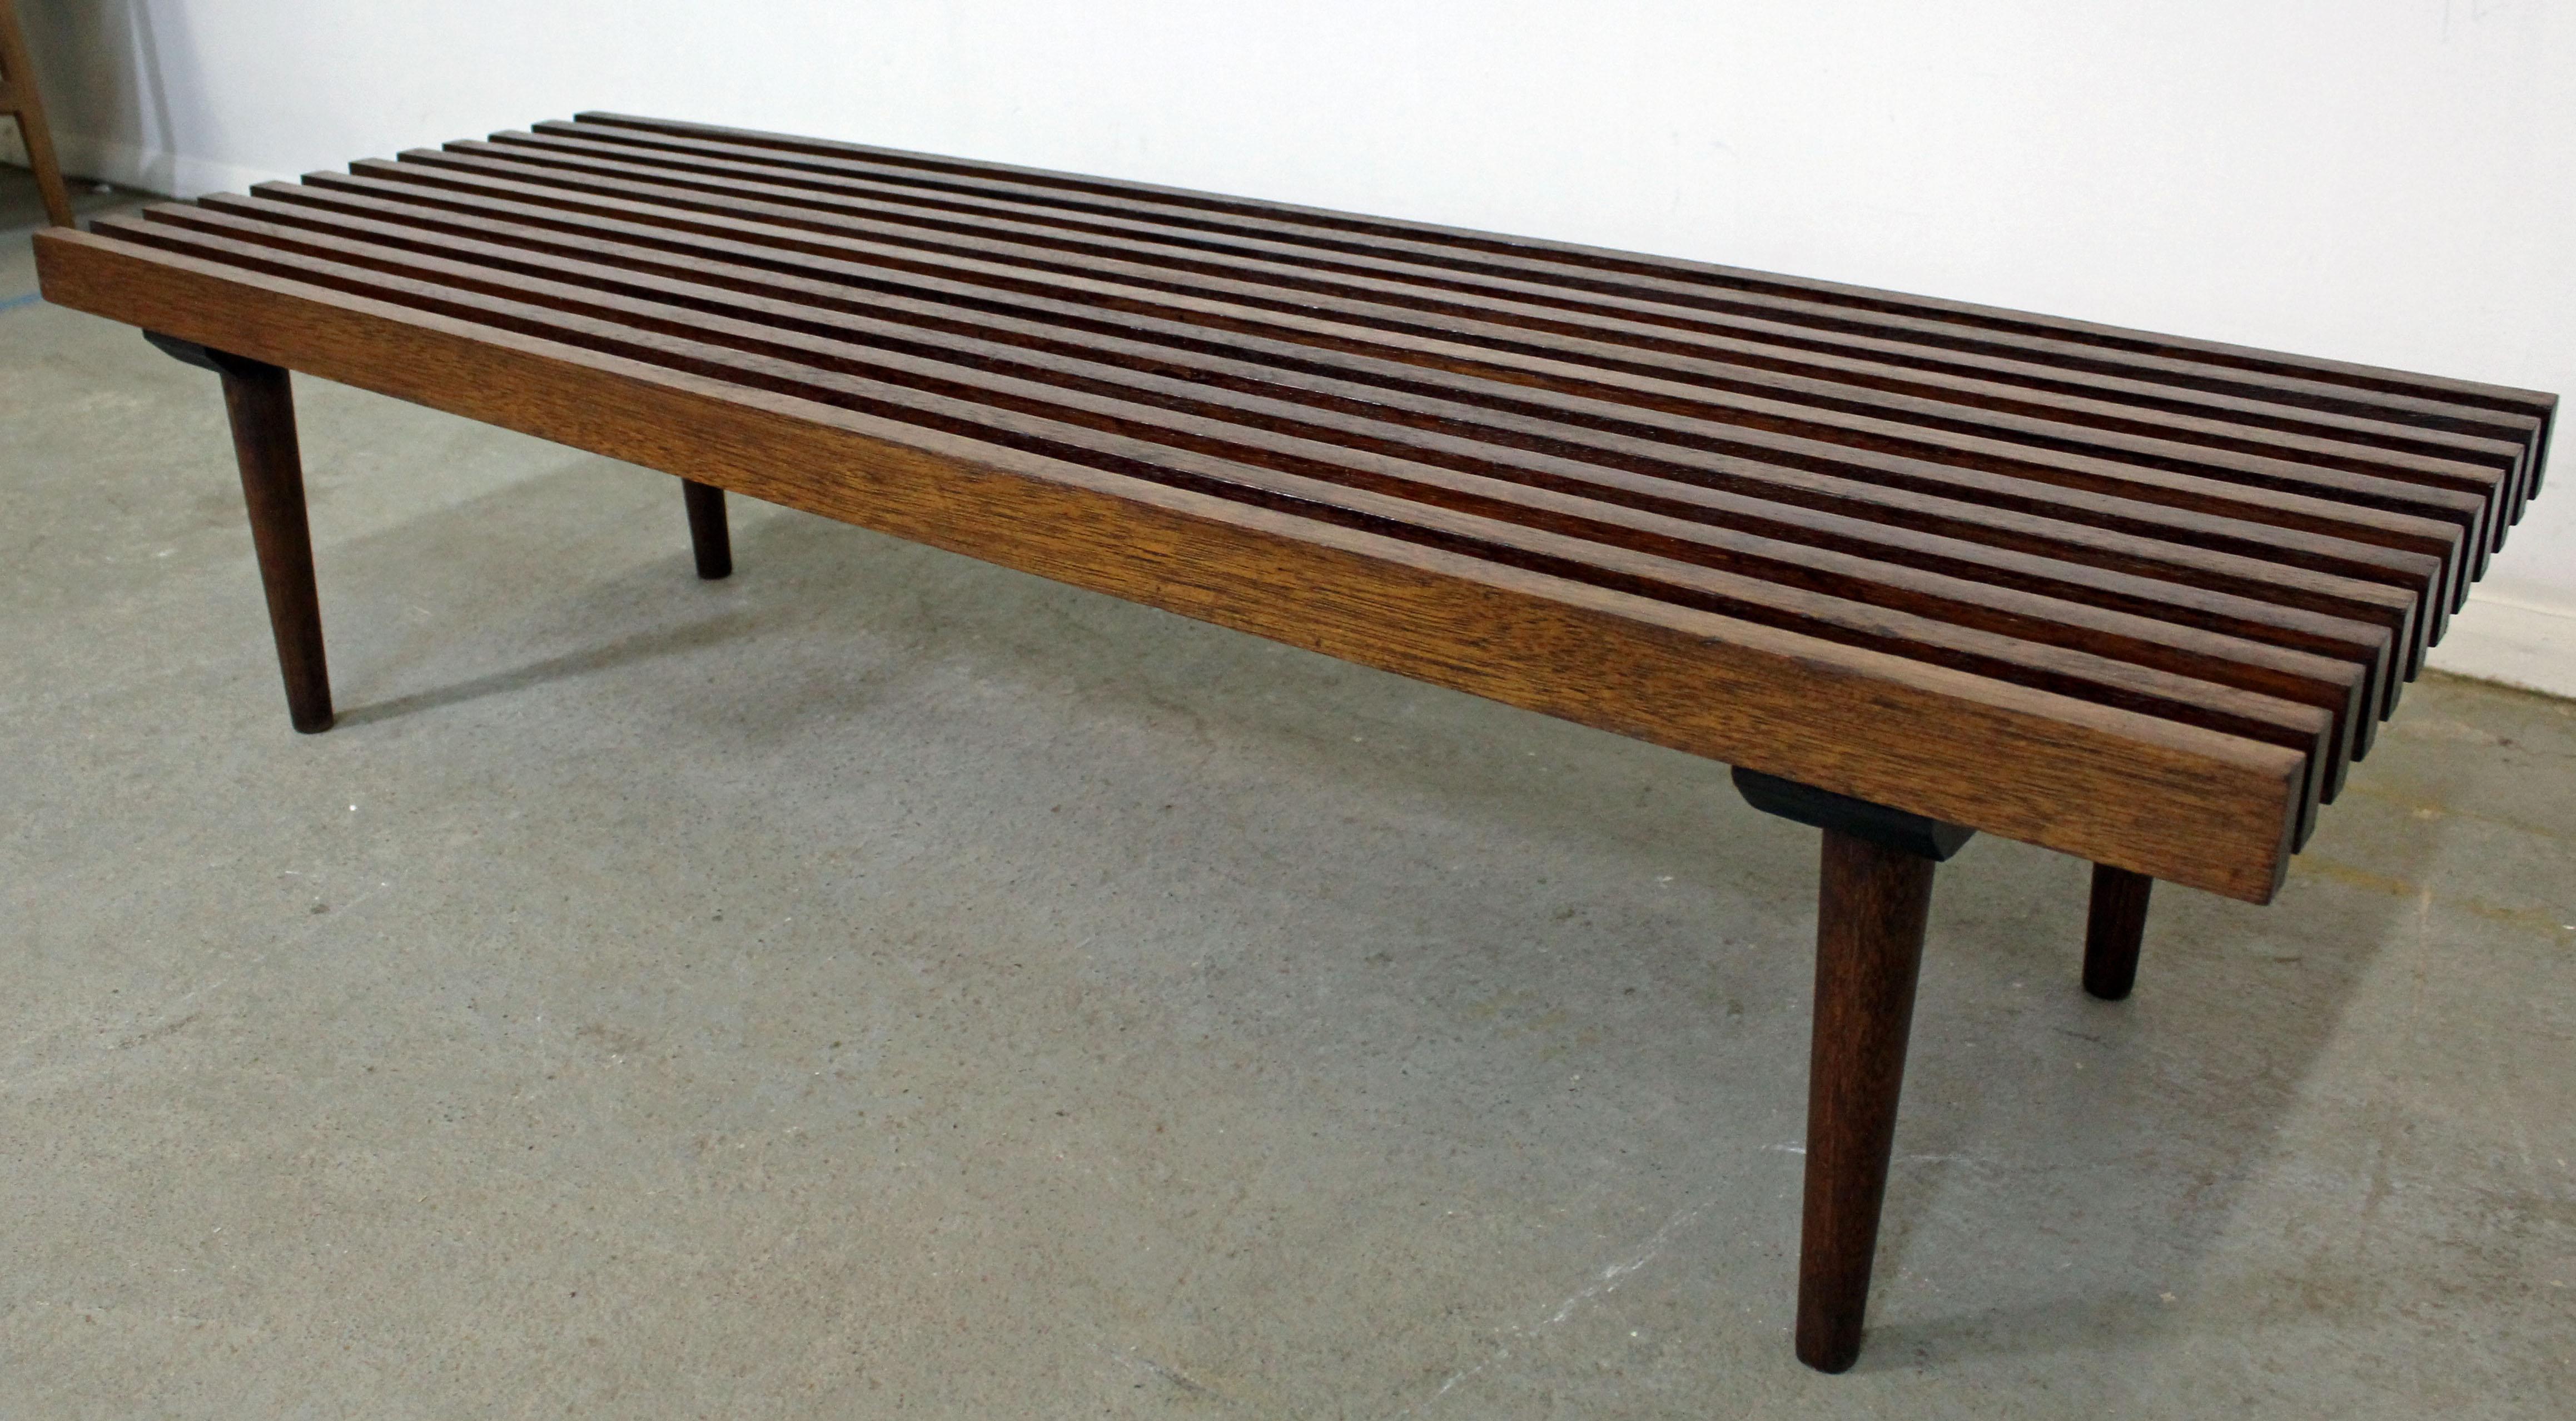 Offered is a Mid-Century Modern walnut slat bench coffee table with brass dowels. It has a nice look and simple lines. It is in good condition, shows some age wear (refinished, small chip on top, age/surface wear- see pictures) but nothing overly